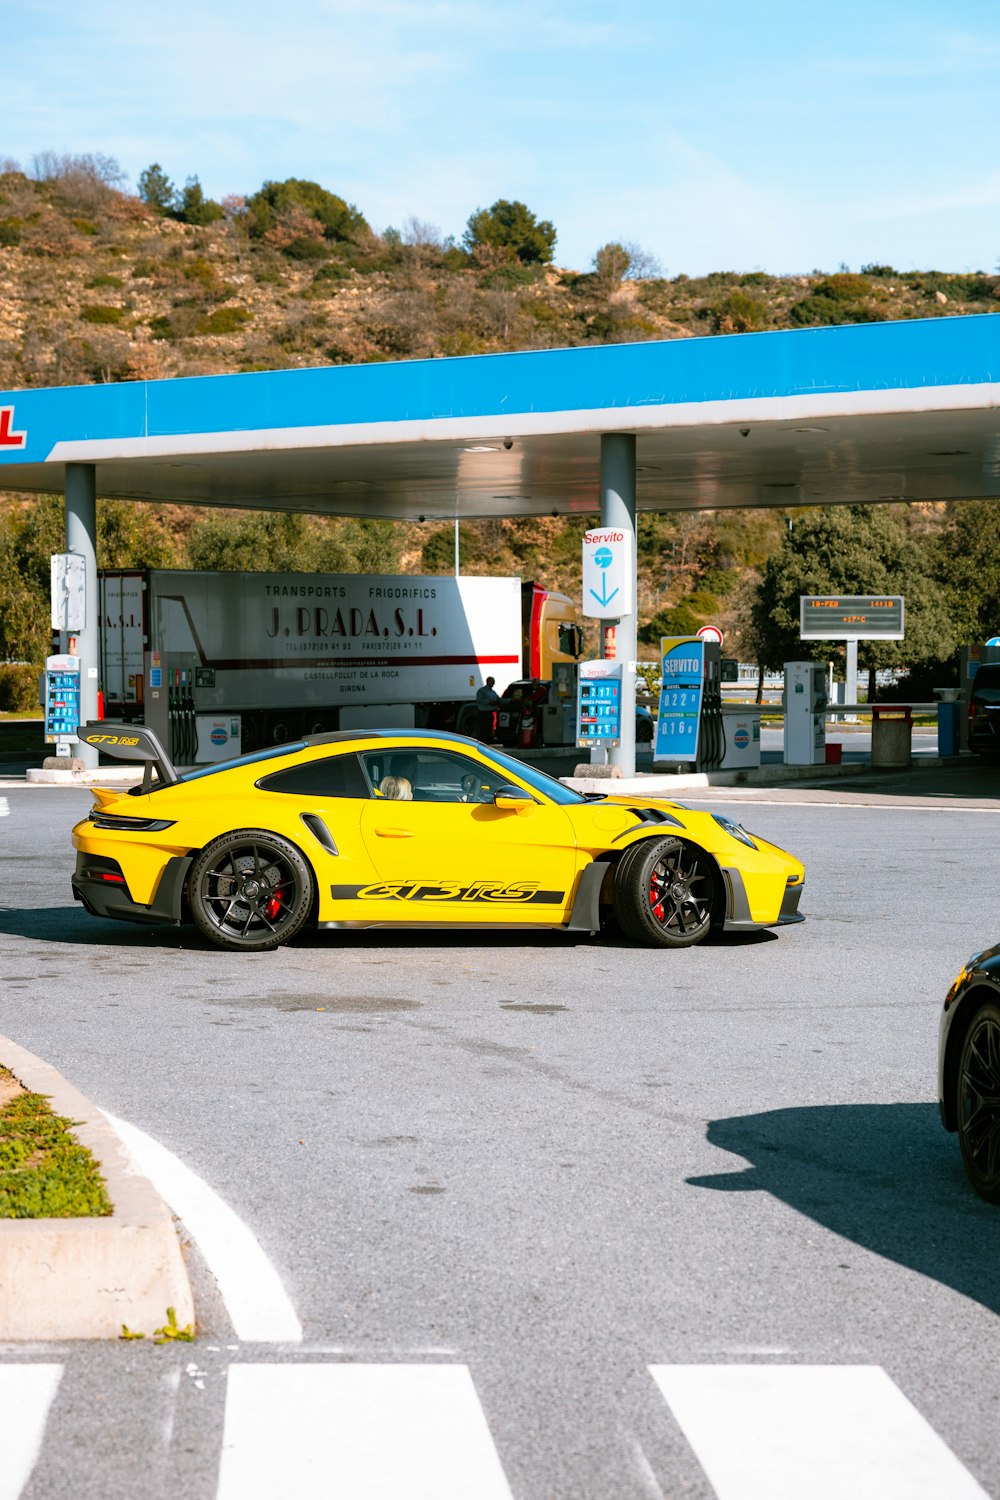 a yellow sports car at a gas station